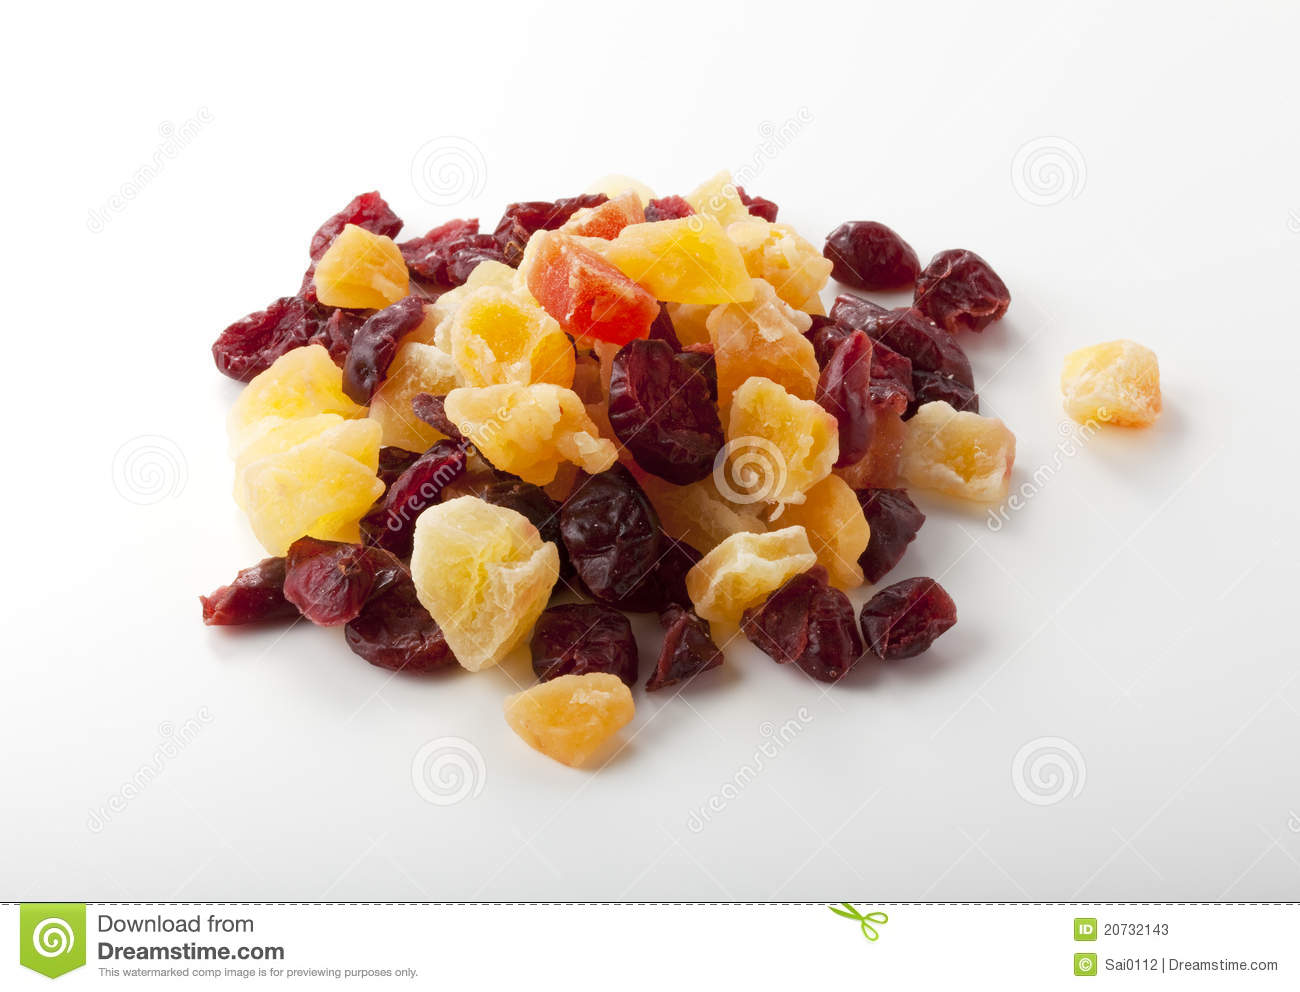 More Similar Stock Images Of   Healthy Trail Mix Snack